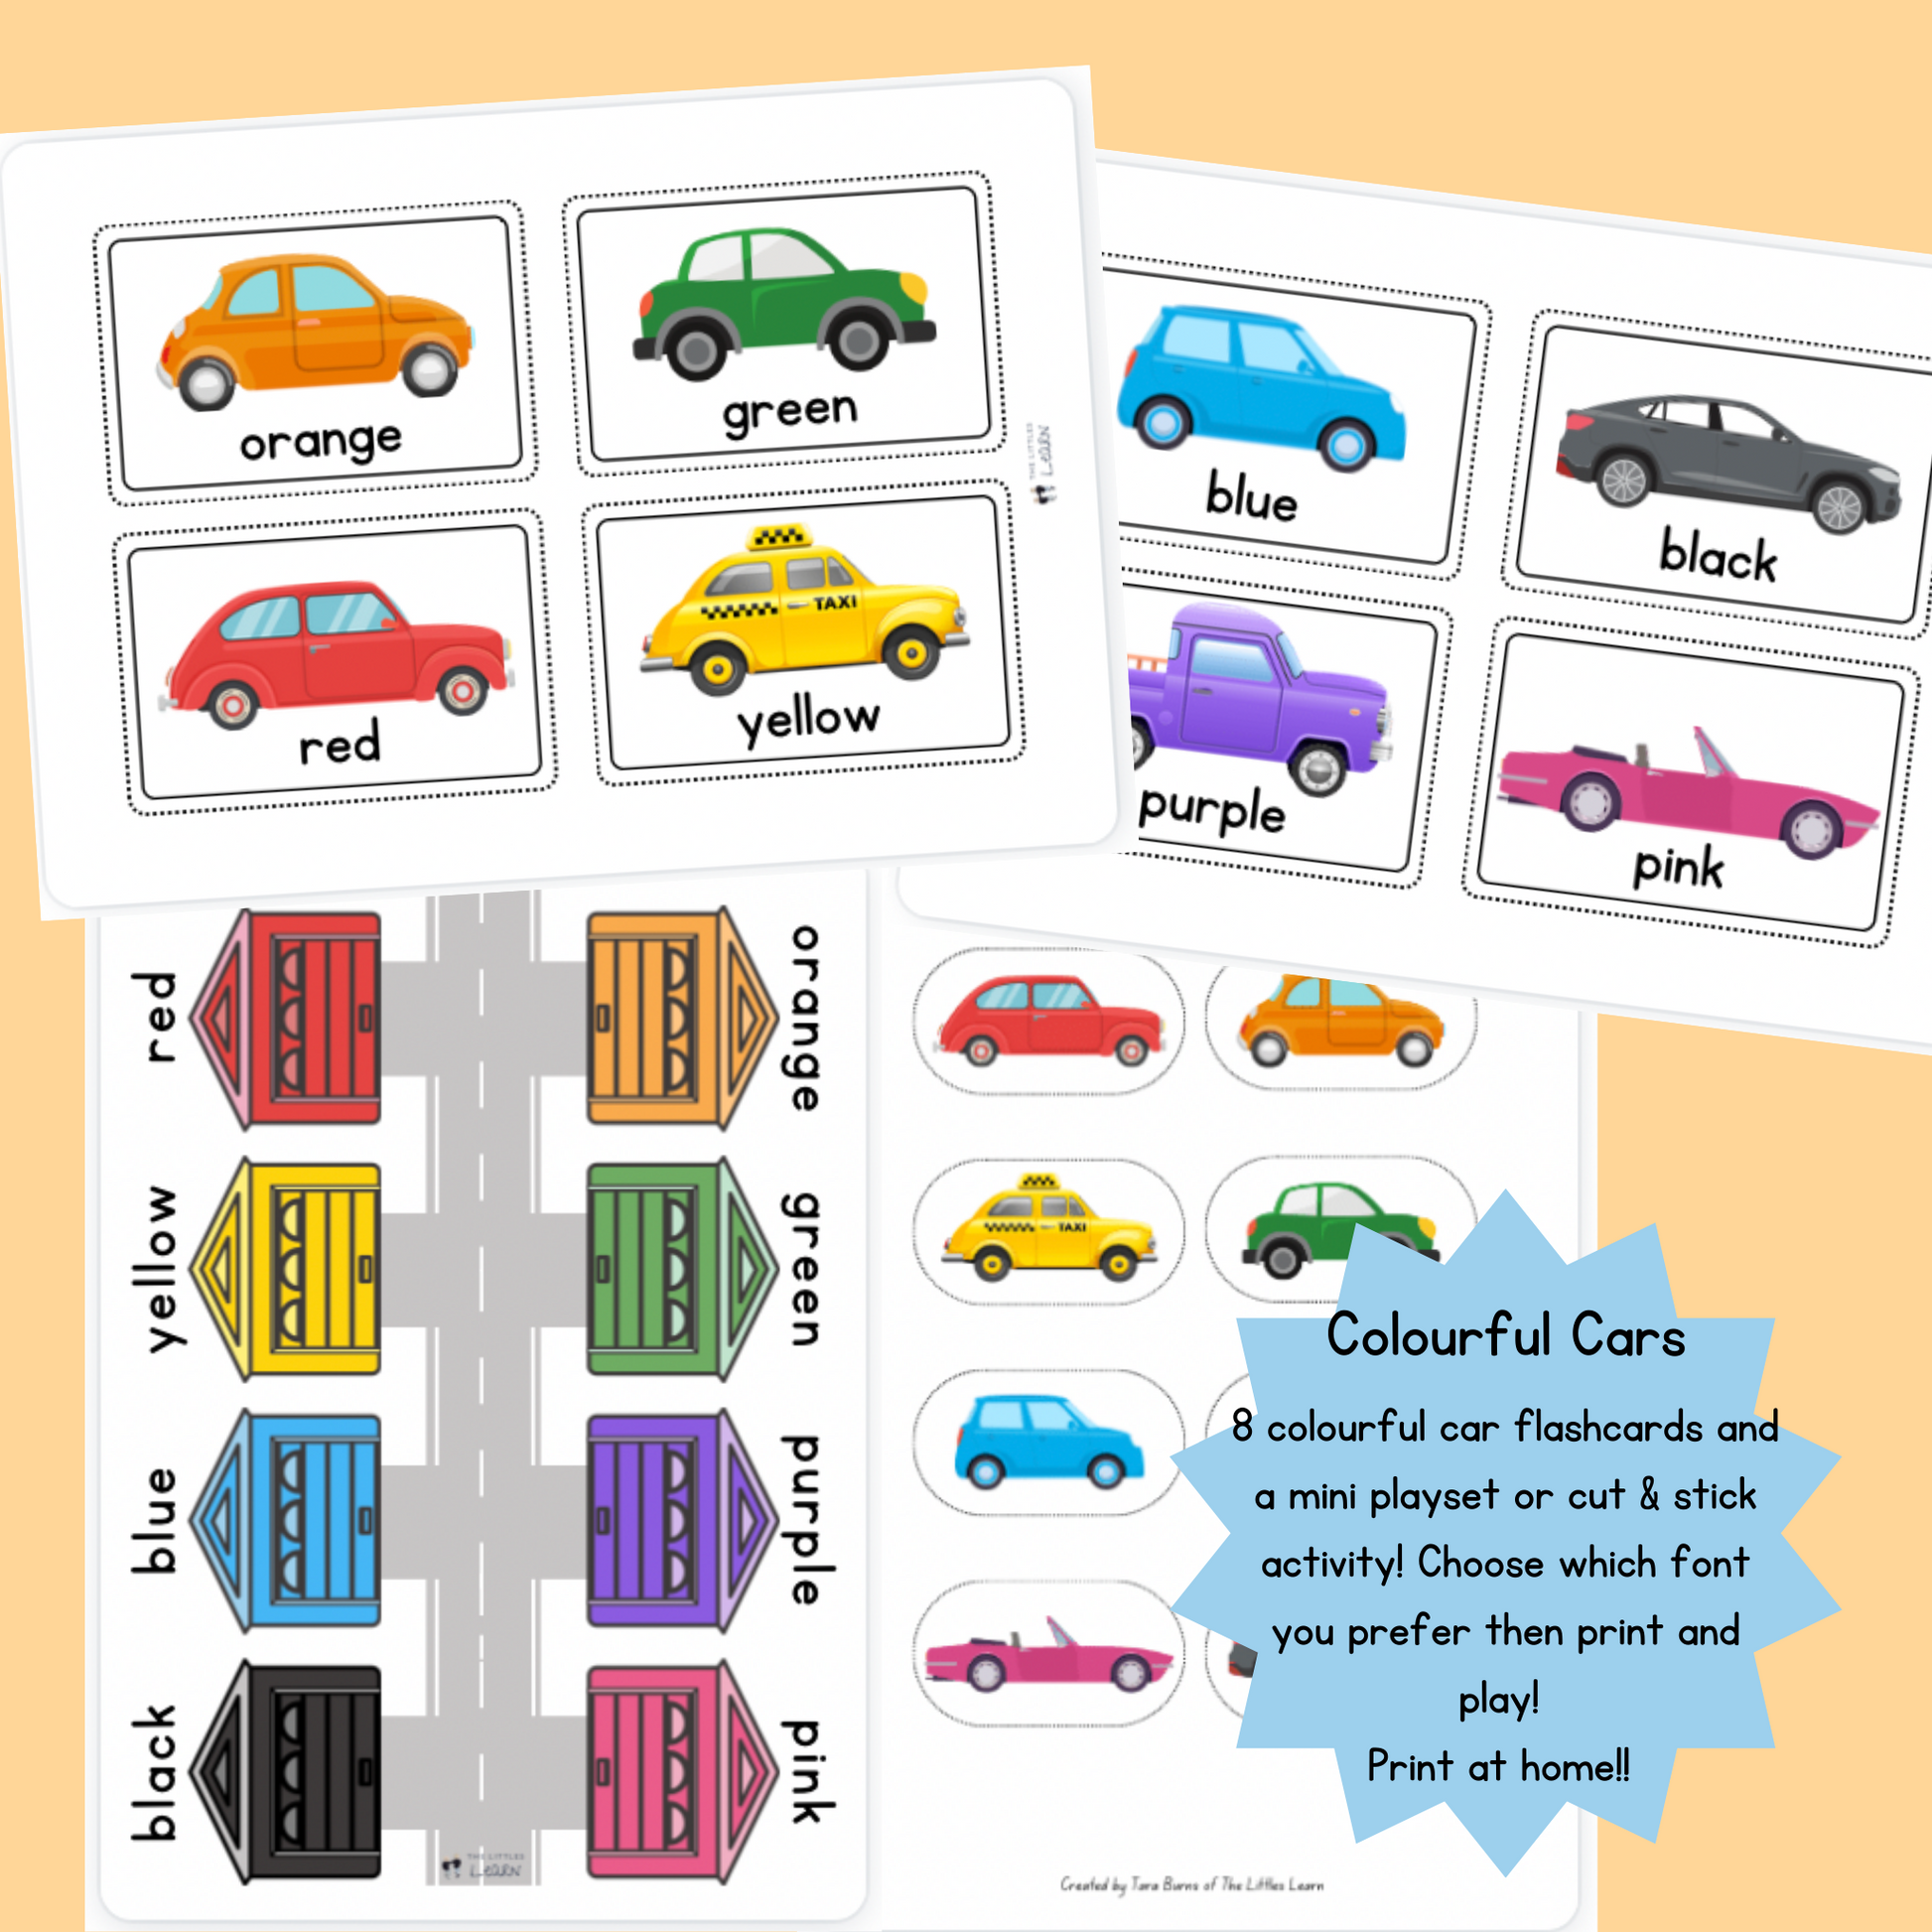 Colour flashcards with cute colourful cars combined with mini cars and a sweet garage playmat